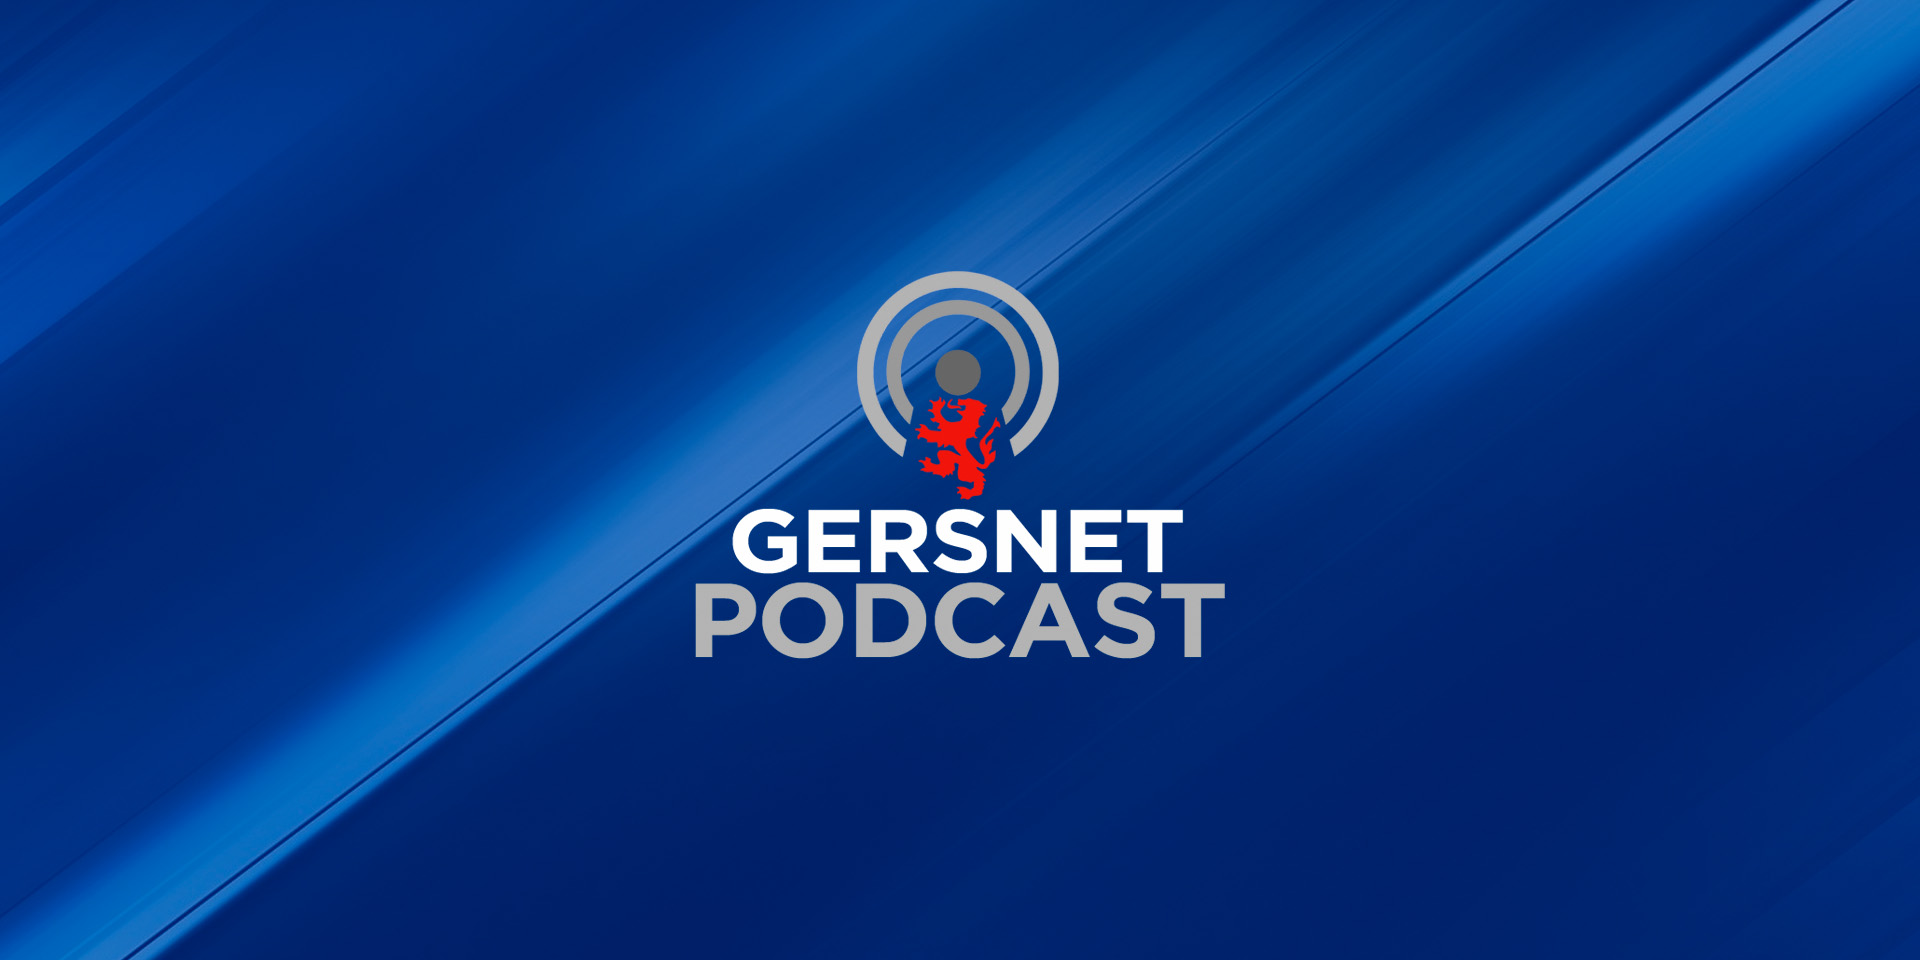 Gersnet Podcast 253 - Into the semi-finals